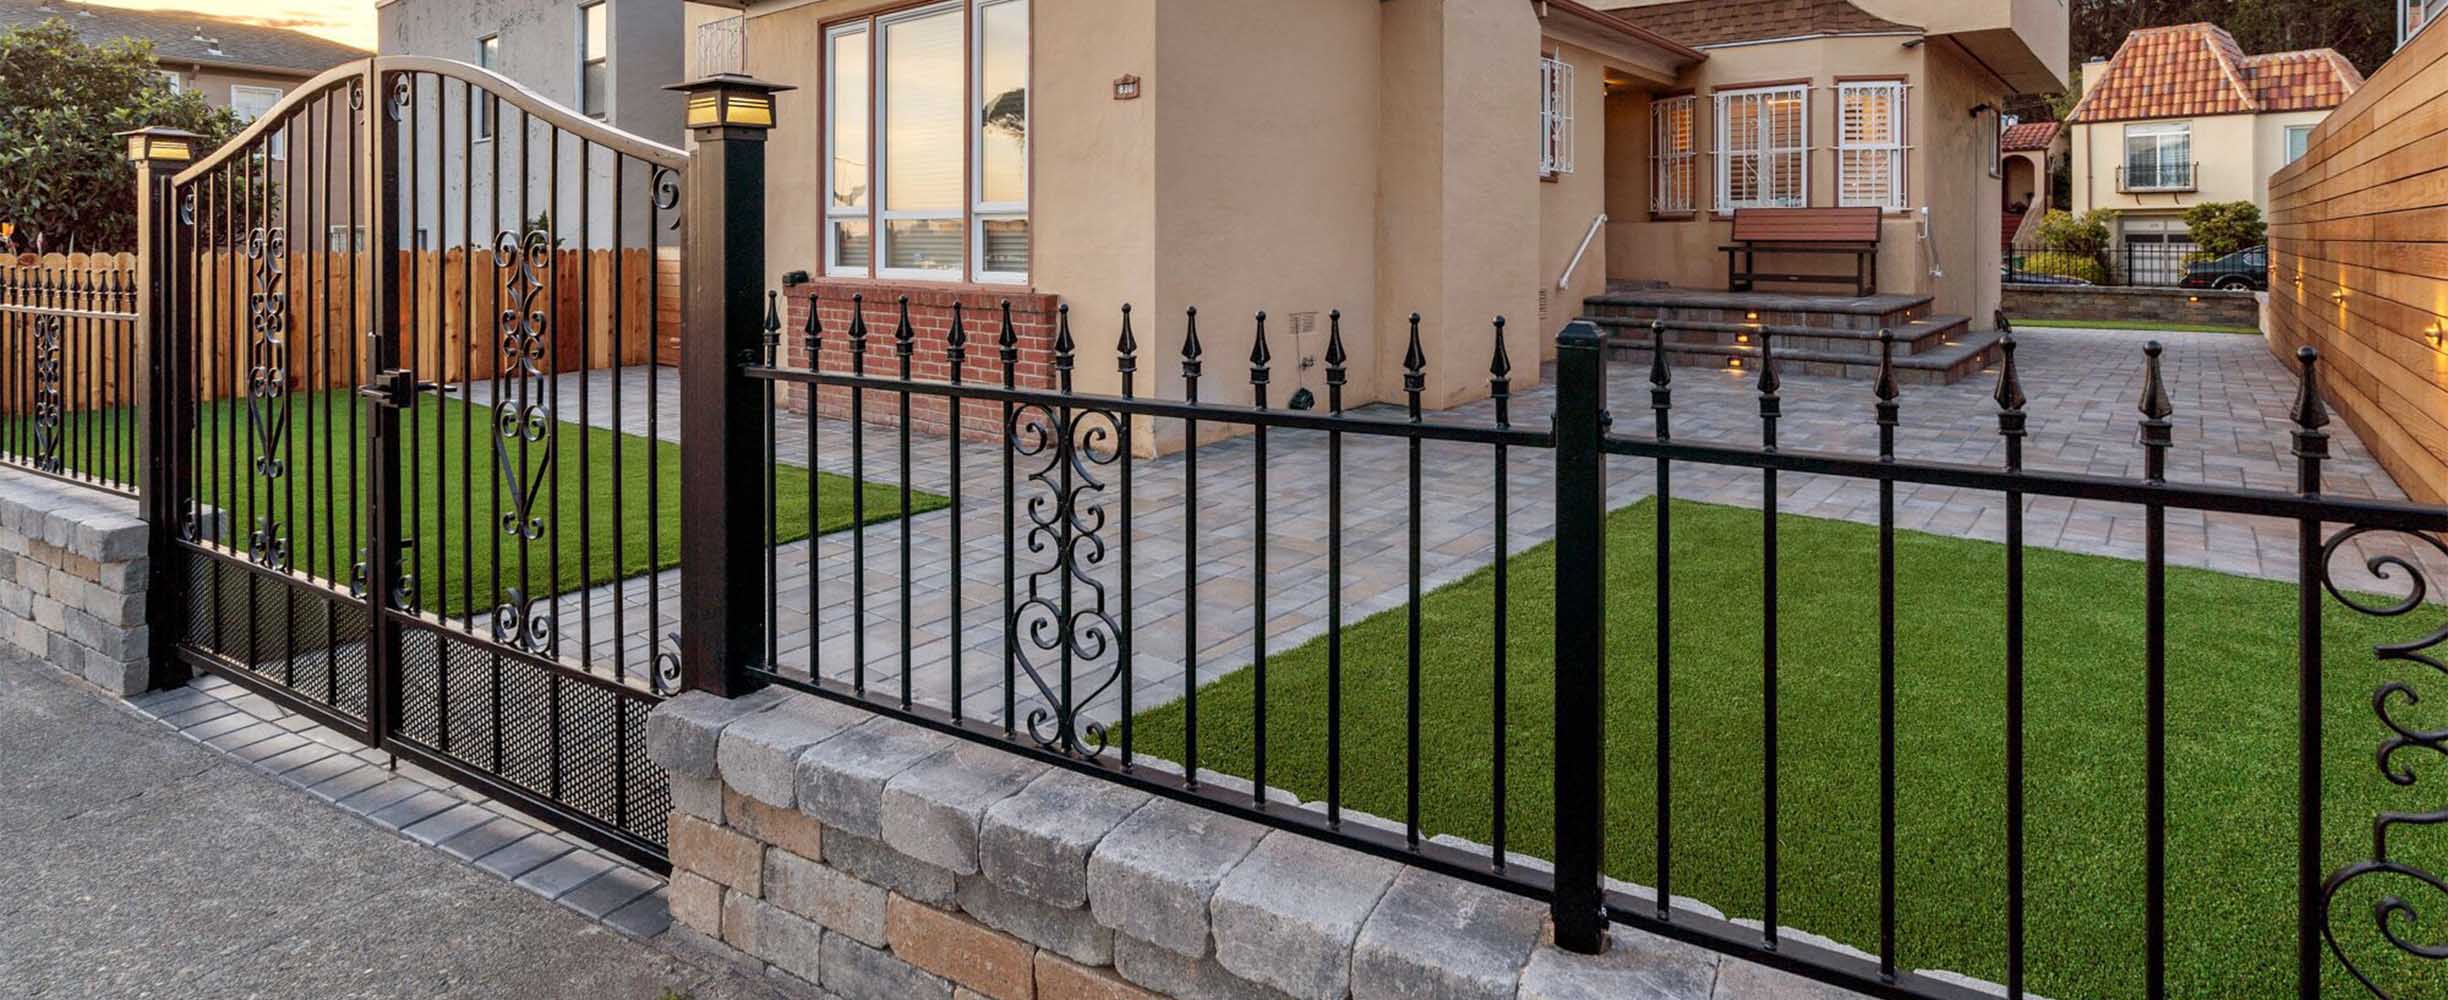 Landscaping, iron gates, stone fence and stobe bricks car entry in tha Bay Area